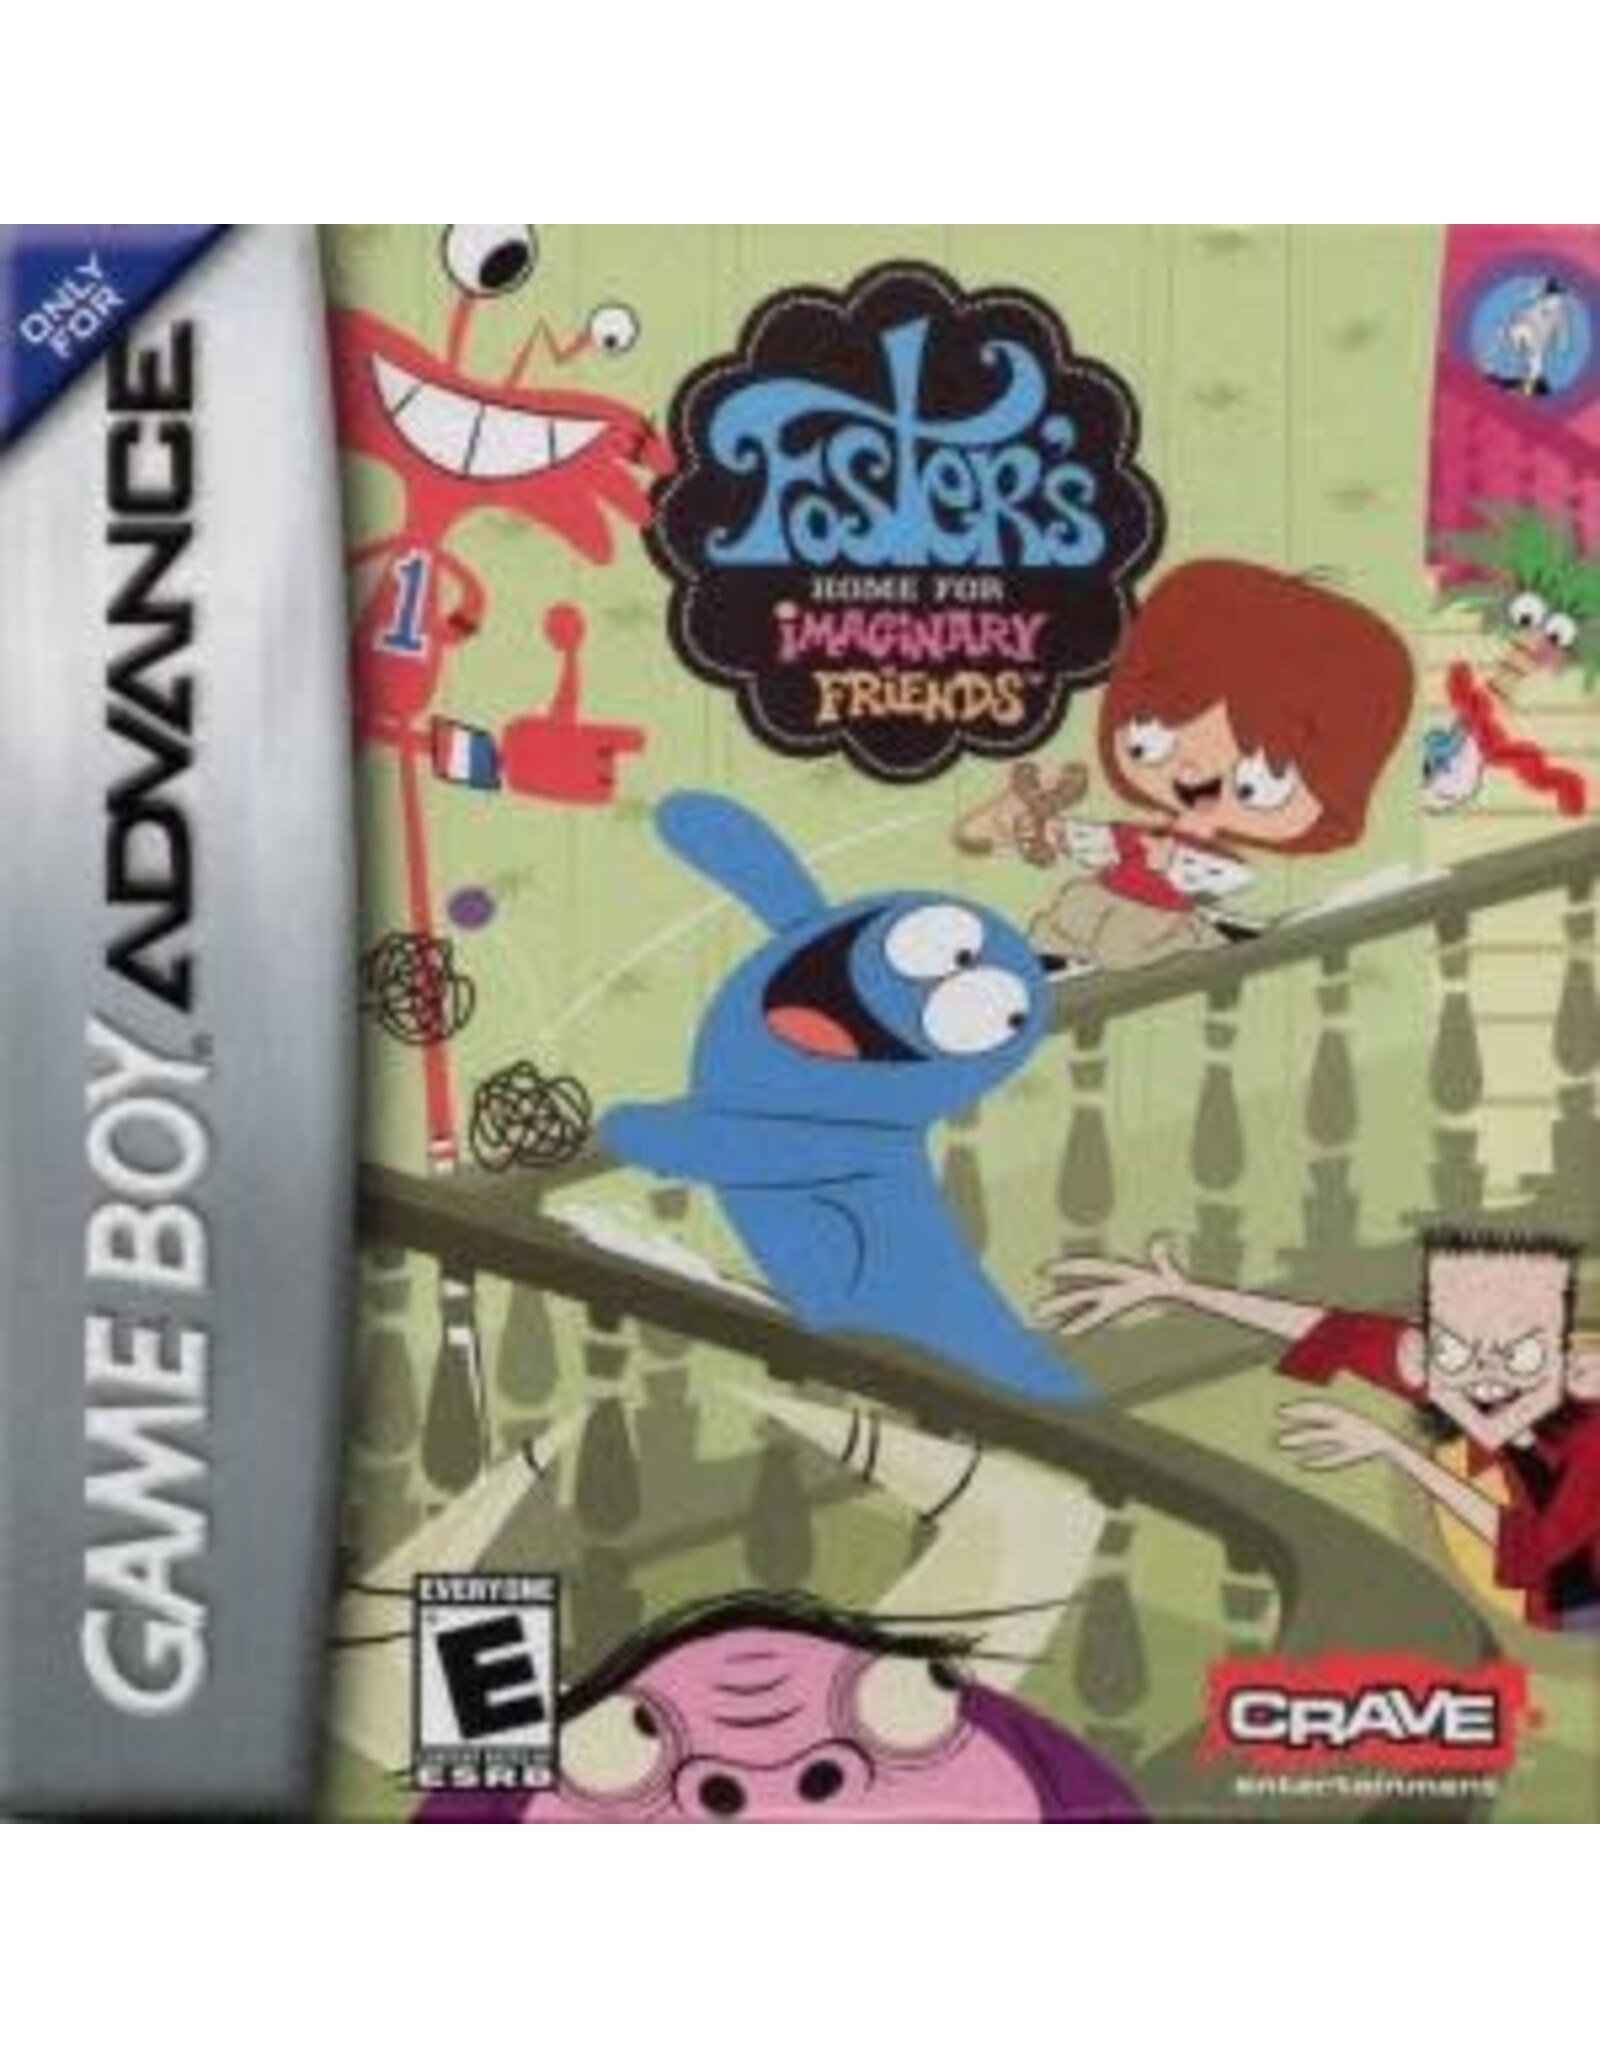 Game Boy Advance Foster's Home for Imaginary Friends (Cart Only)